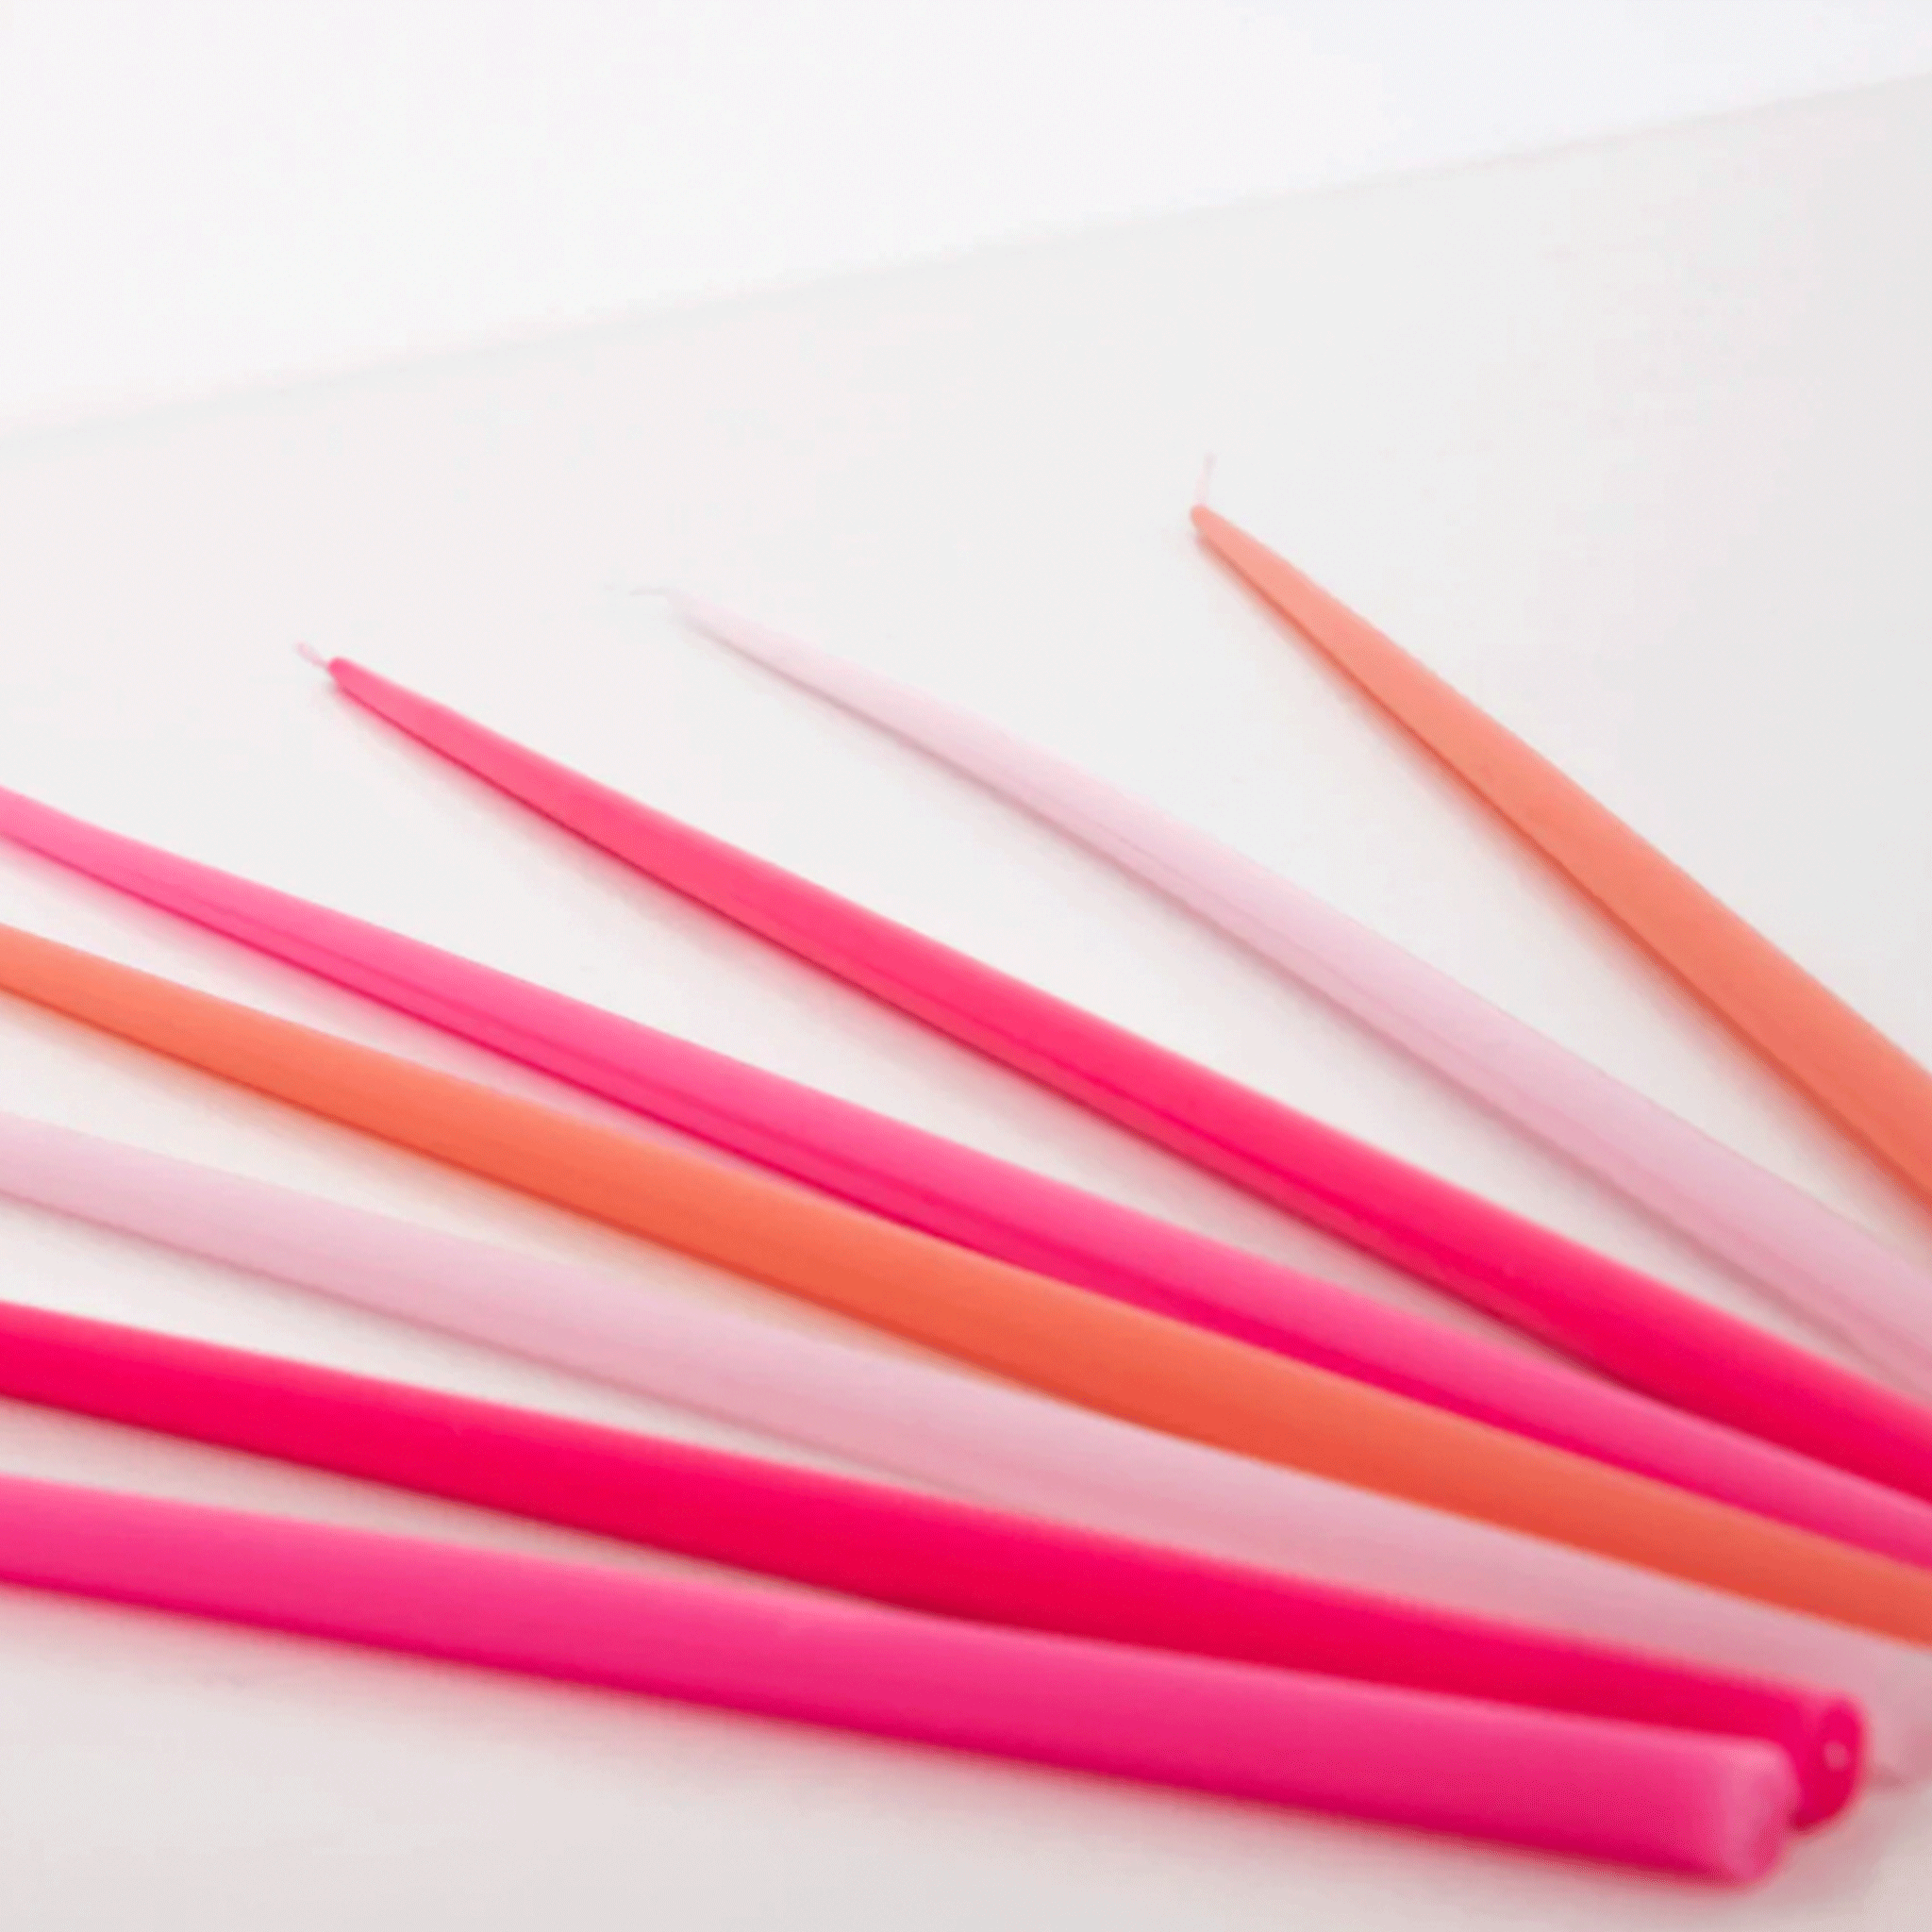 On a white background is a pack of different colored tapered candles in various shades of pink. 